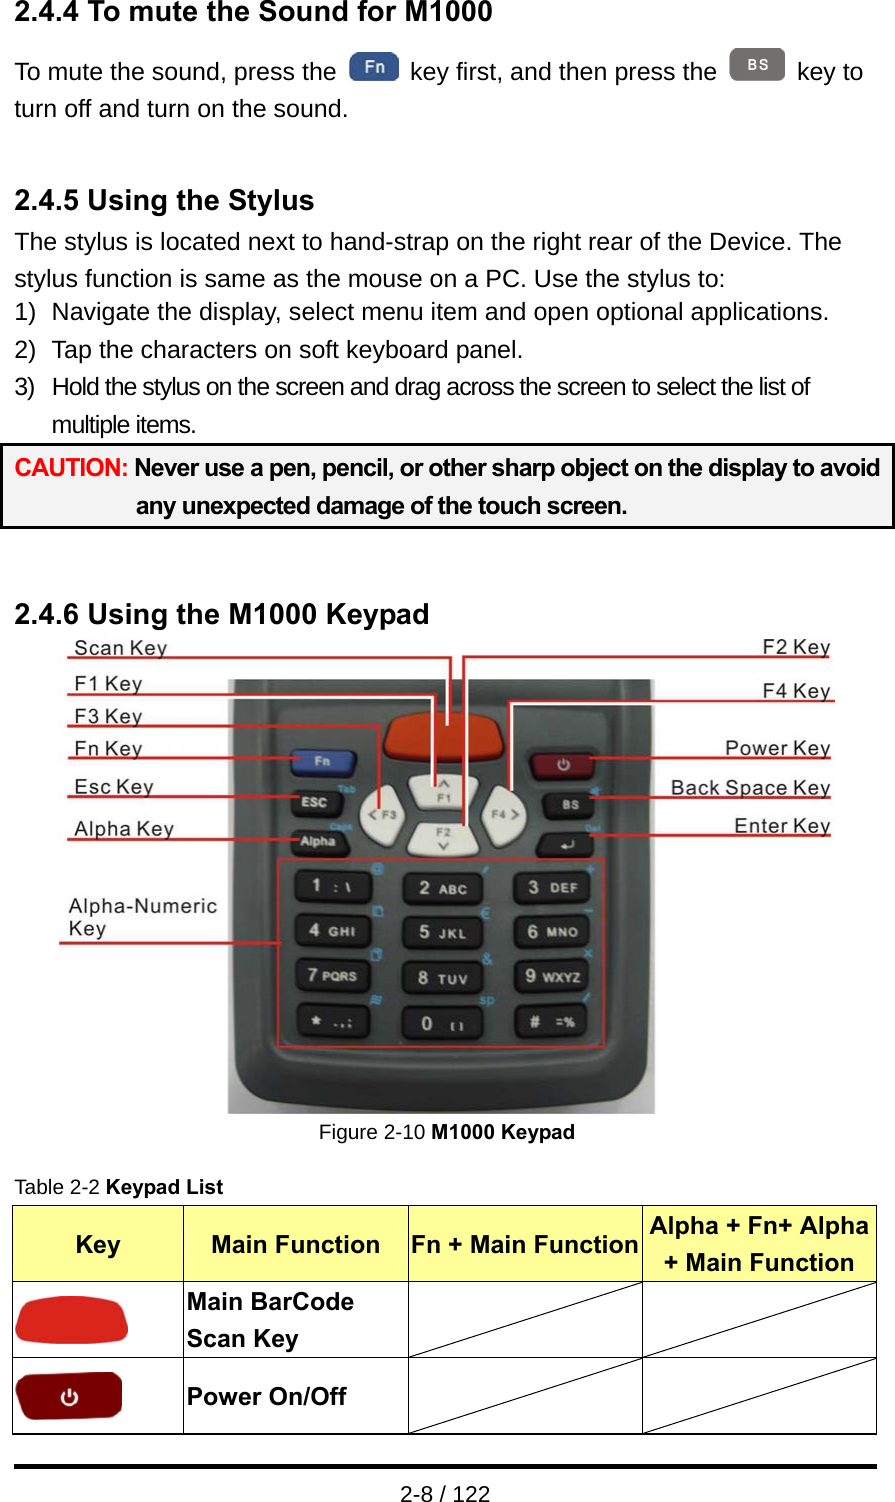  2-8 / 122 2.4.4 To mute the Sound for M1000 To mute the sound, press the    key first, and then press the   key to turn off and turn on the sound.   2.4.5 Using the Stylus The stylus is located next to hand-strap on the right rear of the Device. The stylus function is same as the mouse on a PC. Use the stylus to: 1)  Navigate the display, select menu item and open optional applications. 2)  Tap the characters on soft keyboard panel. 3)  Hold the stylus on the screen and drag across the screen to select the list of multiple items. CAUTION: Never use a pen, pencil, or other sharp object on the display to avoid any unexpected damage of the touch screen.   2.4.6 Using the M1000 Keypad  Figure 2-10 M1000 Keypad  Table 2-2 Keypad List Key  Main Function  Fn + Main Function Alpha + Fn+ Alpha + Main Function  Main BarCode Scan Key     Power On/Off     